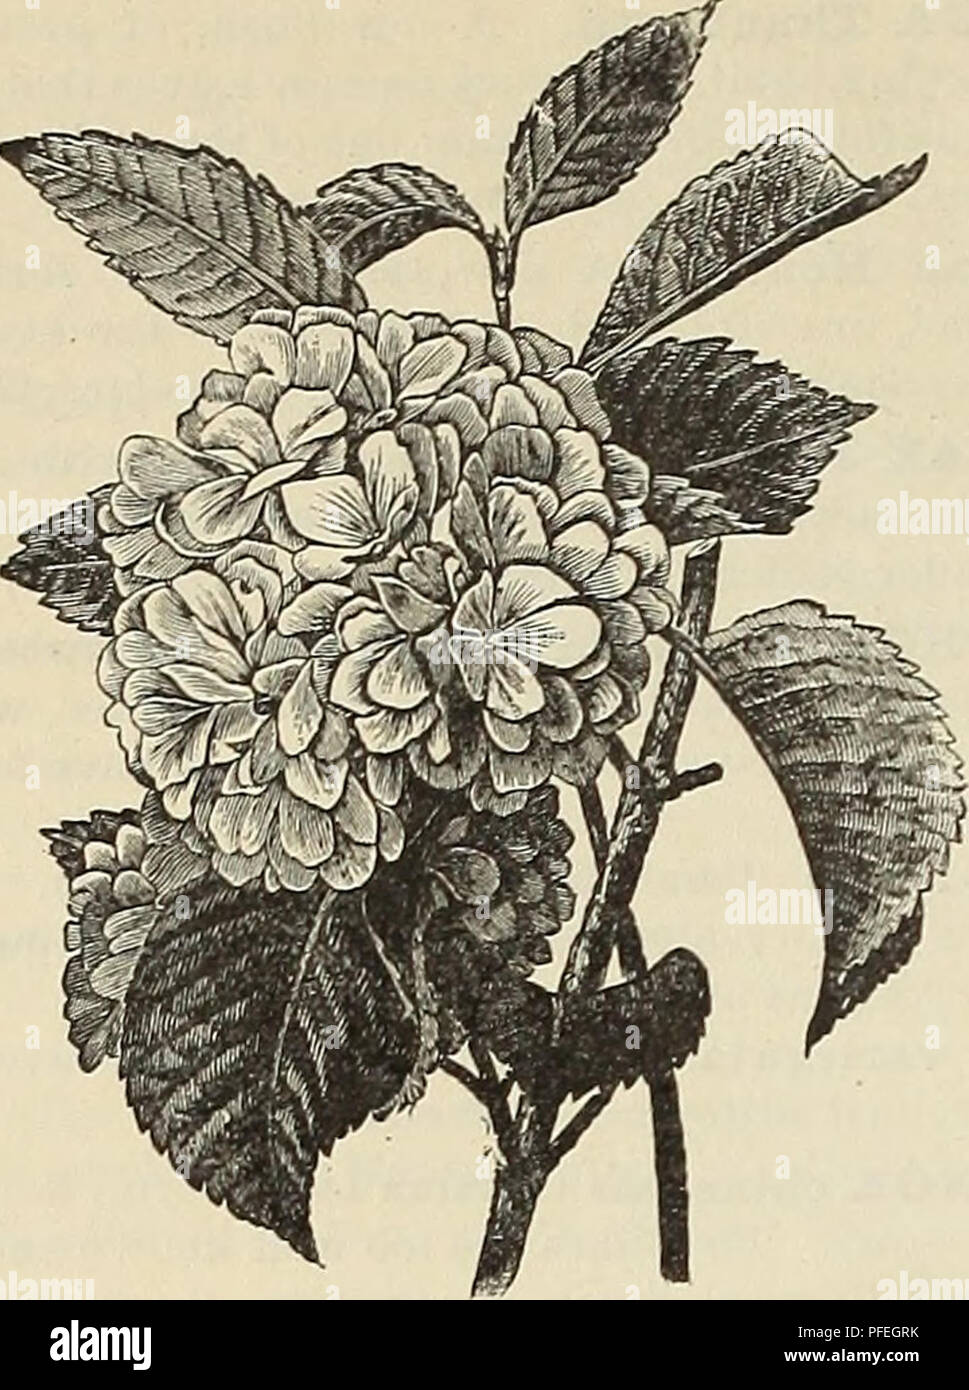 . Descriptive catalogue of ornamental trees, plants, vines, fruits, etc.. Nurseries (Horticulture) Pennsylvania Catalogs; Plants, Ornamental Catalogs; Trees Seedlings Catalogs; Flowers Seeds Catalogs. 24 Sa/tuel C. /Aoon'S Descriptive Catalogue.. VIBURNUM PLICATUM. TAMAKIX parviflora (African Tamarisk^ The flowers are a blighter pink thau T. galUca: excel- lent for planting near the sea. 25 cts. VIBURNUM lantana (Wayfaring Tree). A large spreading bush, vritii massive foliage; flowers cream-white, in flat cymes. 25 cts. V. opulus (Cranberry Tree). The fruit of this bush is of very nearly the  Stock Photo